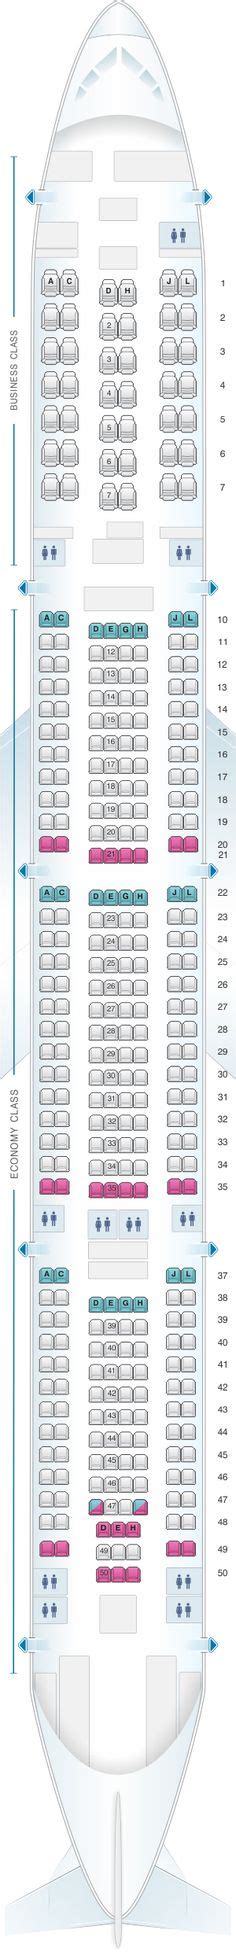 Seat Map Eurowings Airbus A330 200 Hawaiian Airlines Malaysia